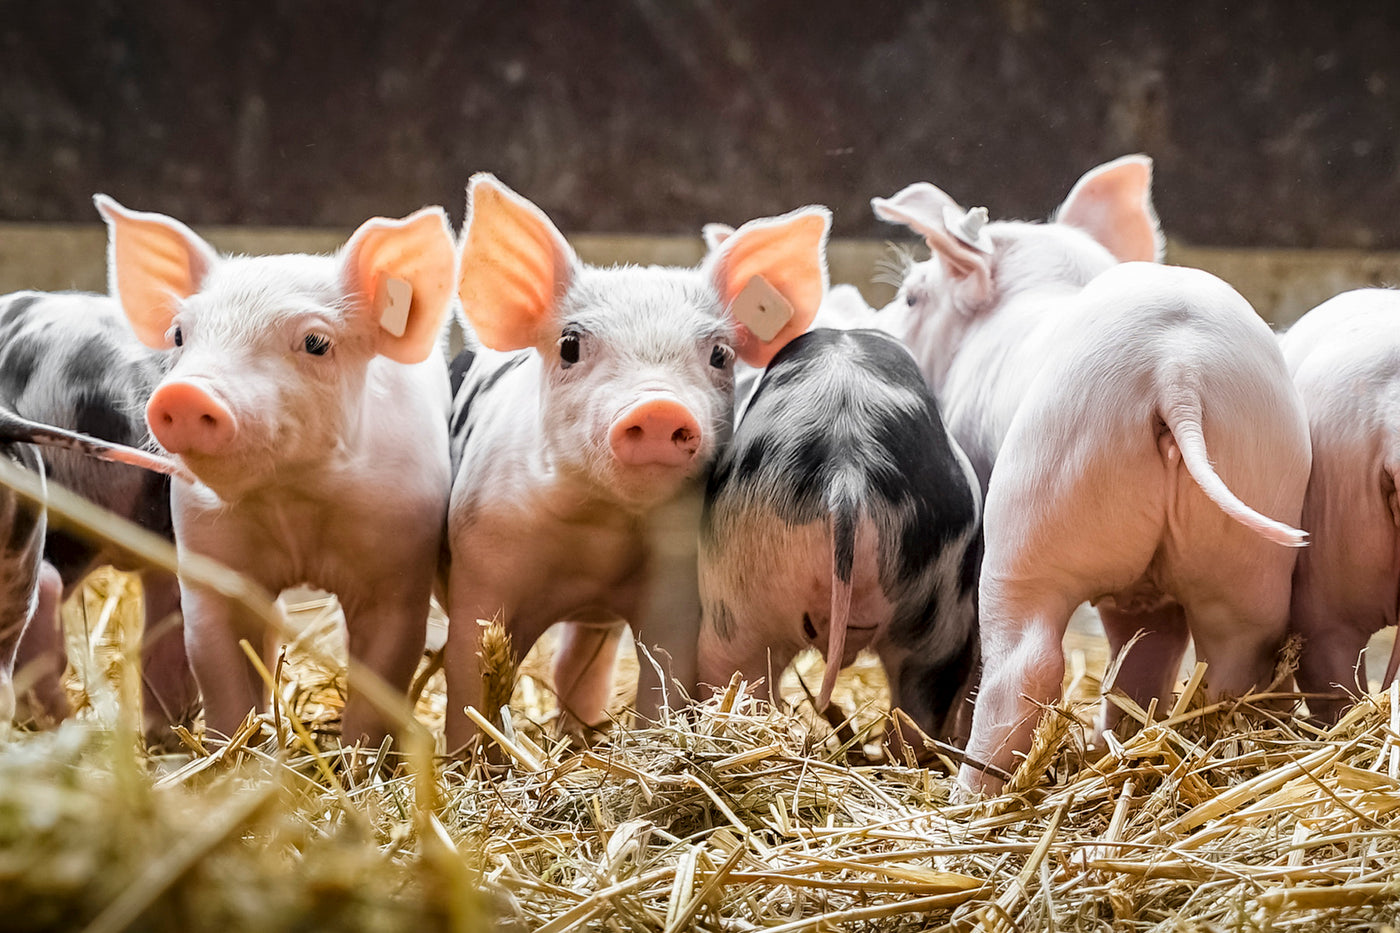 Several piglets are standing amongst hay on the ground. Two are looking at the camera, and two are facing away from the camera.